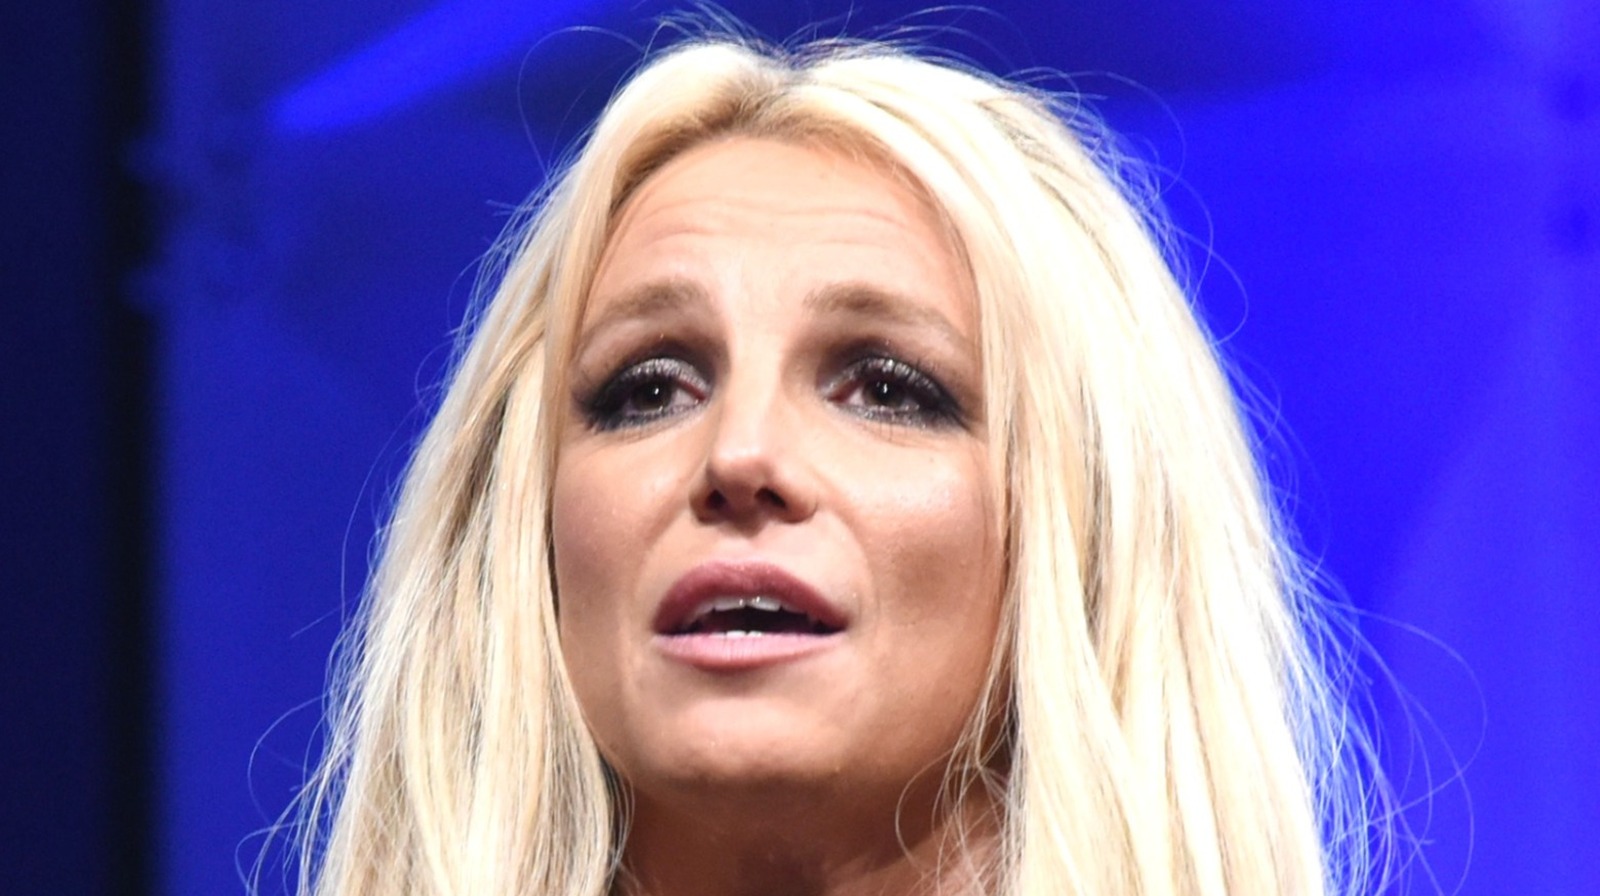 The Britney Spears Documentary Netflix Subscribers Can't Stop Watching